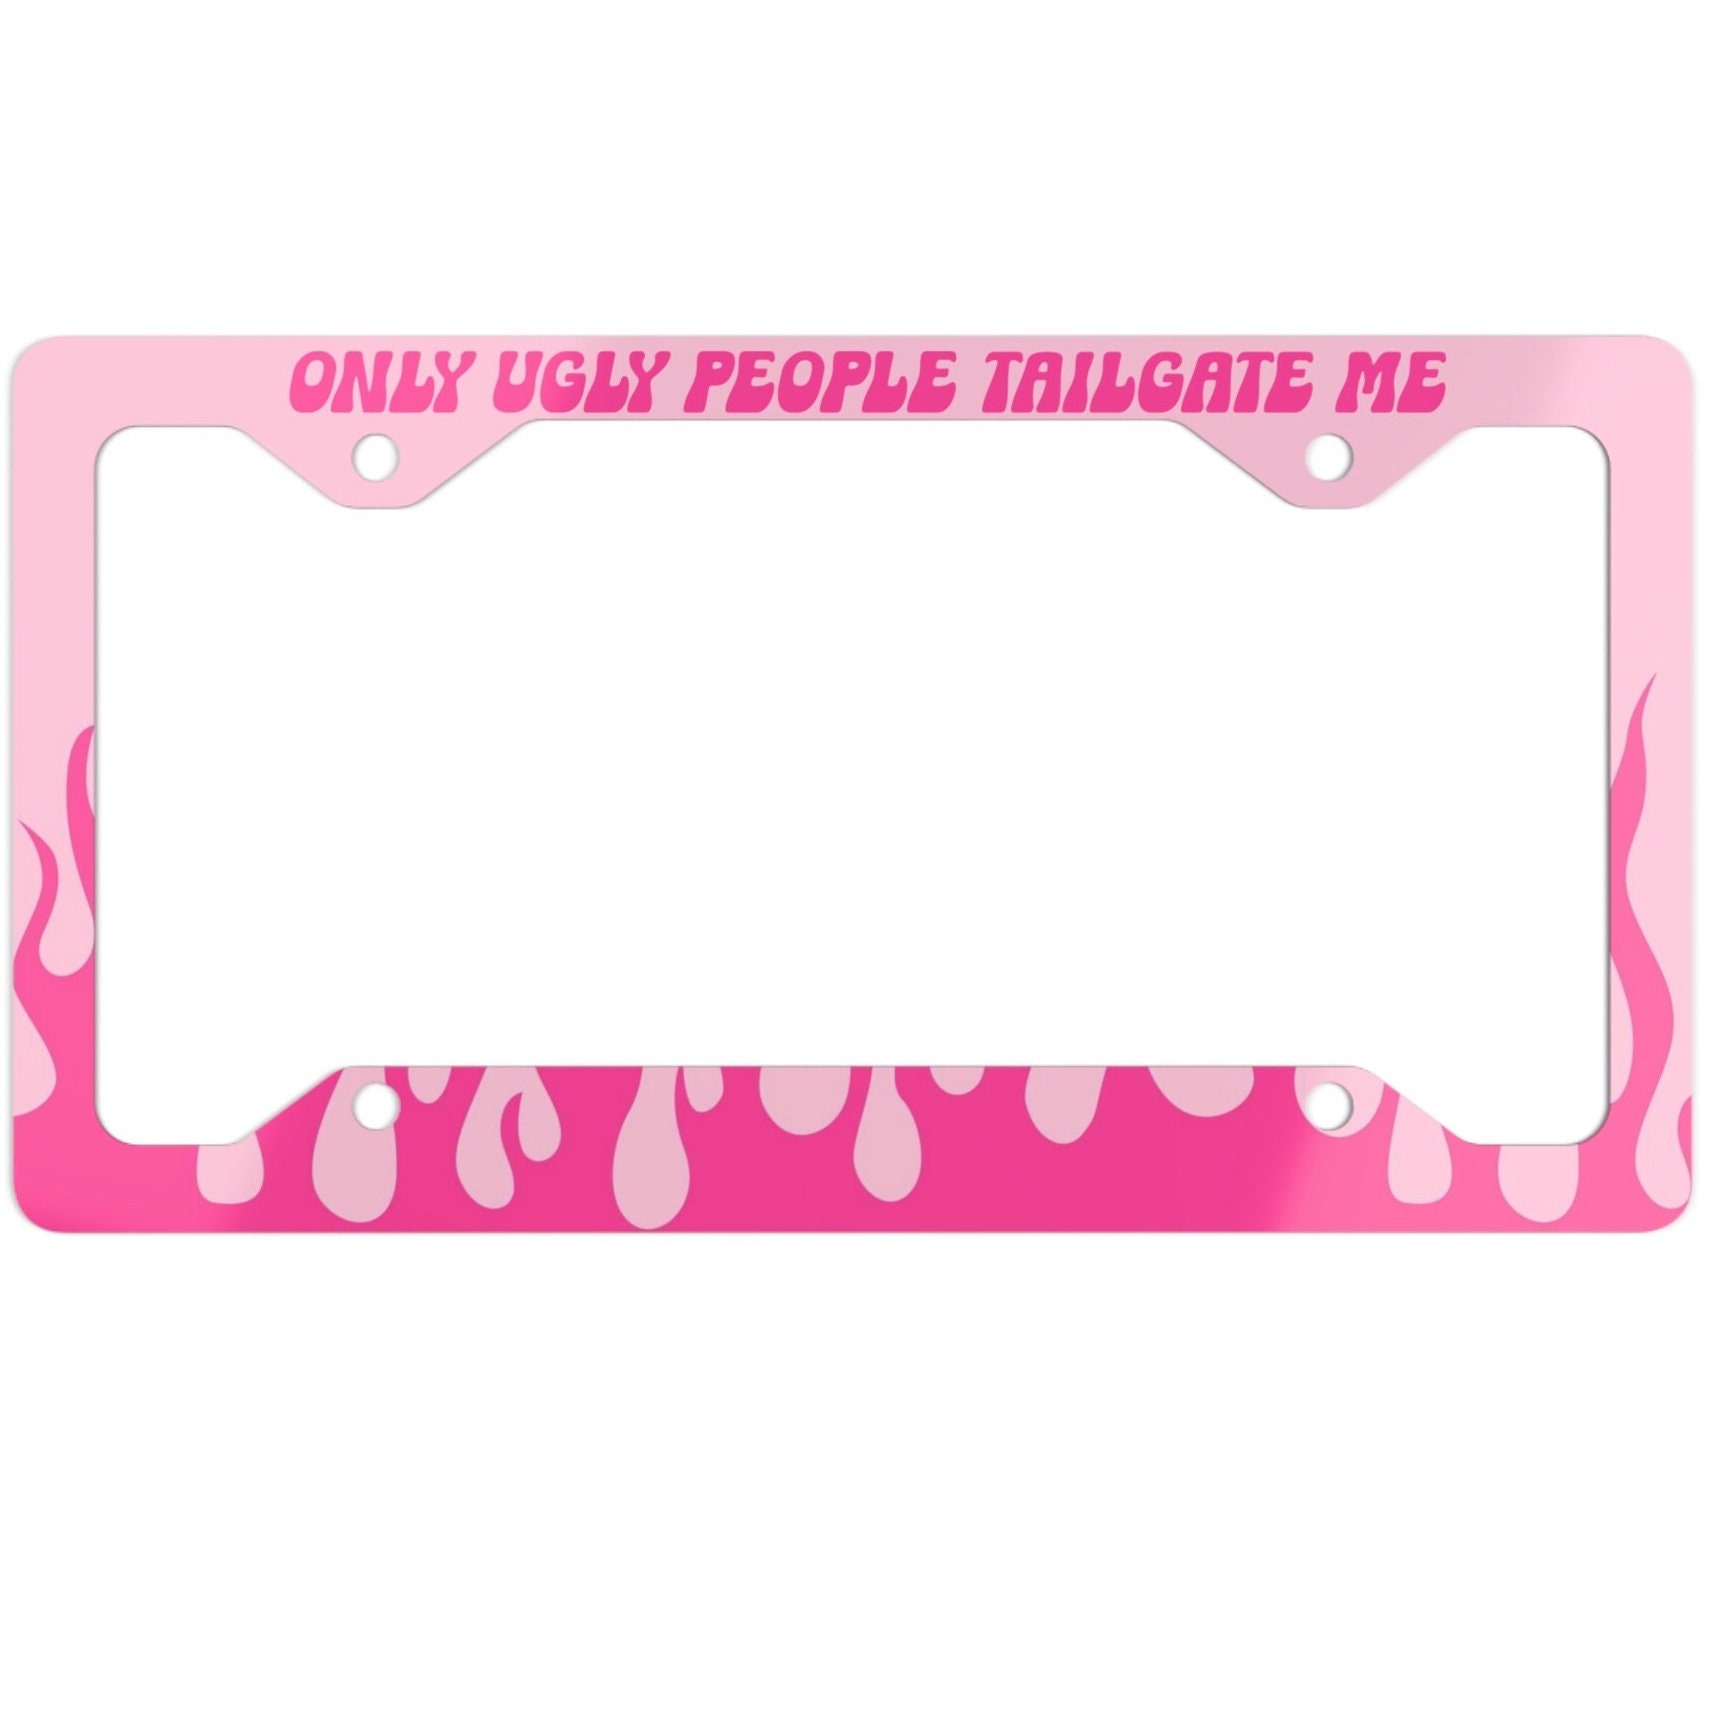 Checkered License Plate Frame, Y2K Car Accessories, Retro License Plate  Covers, Pink & Blue Vanity Car Tag Holder for Women, Gifts for Teens 